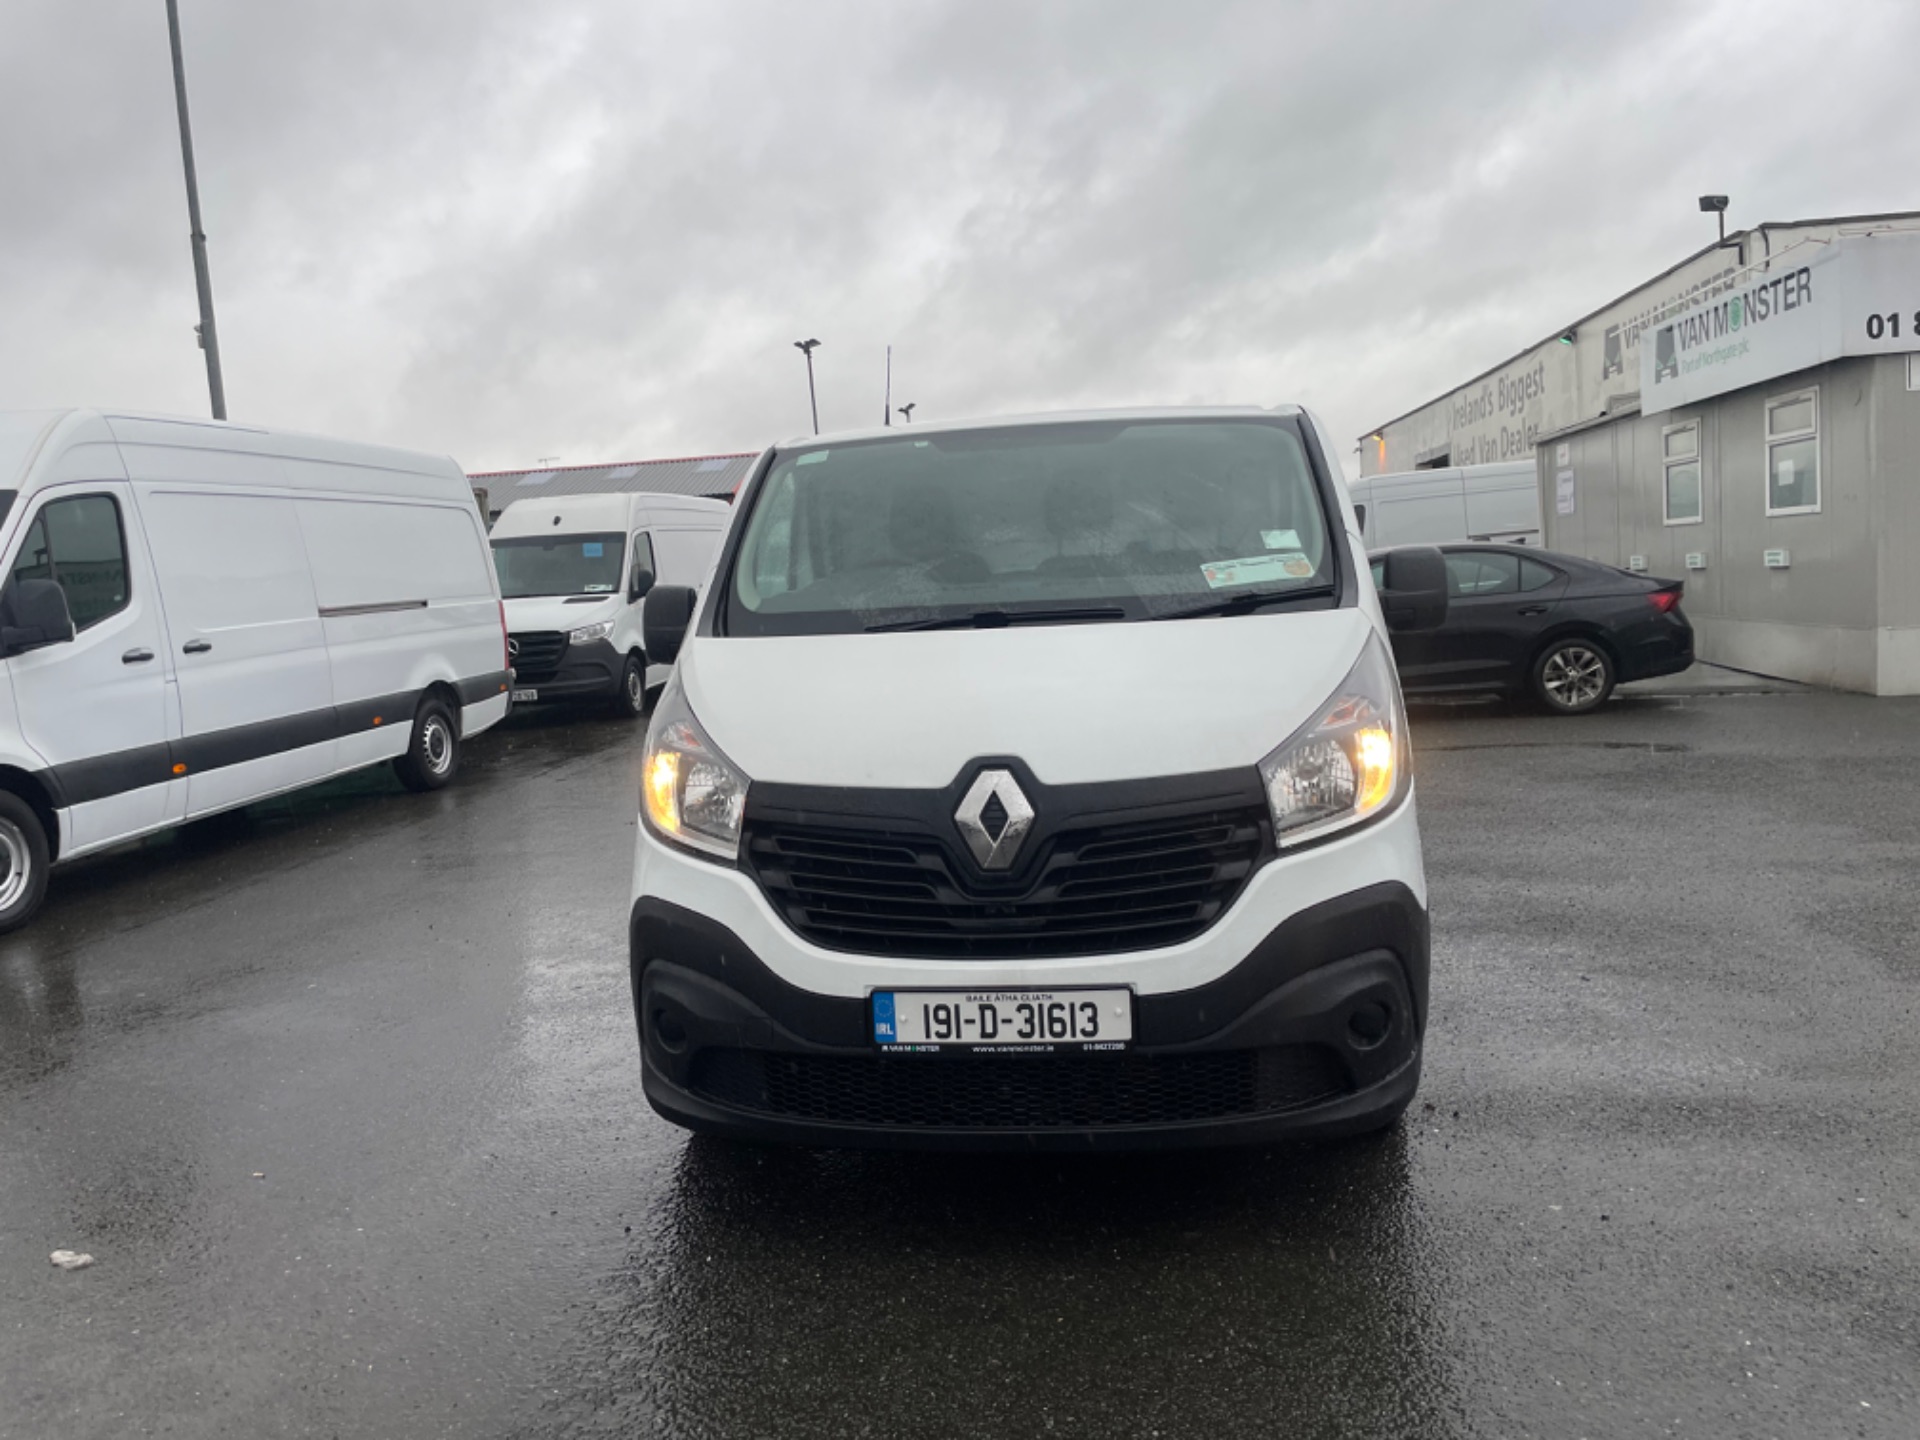 2019 Renault Trafic LL29 DCI 120 Business (191D31613) Image 2